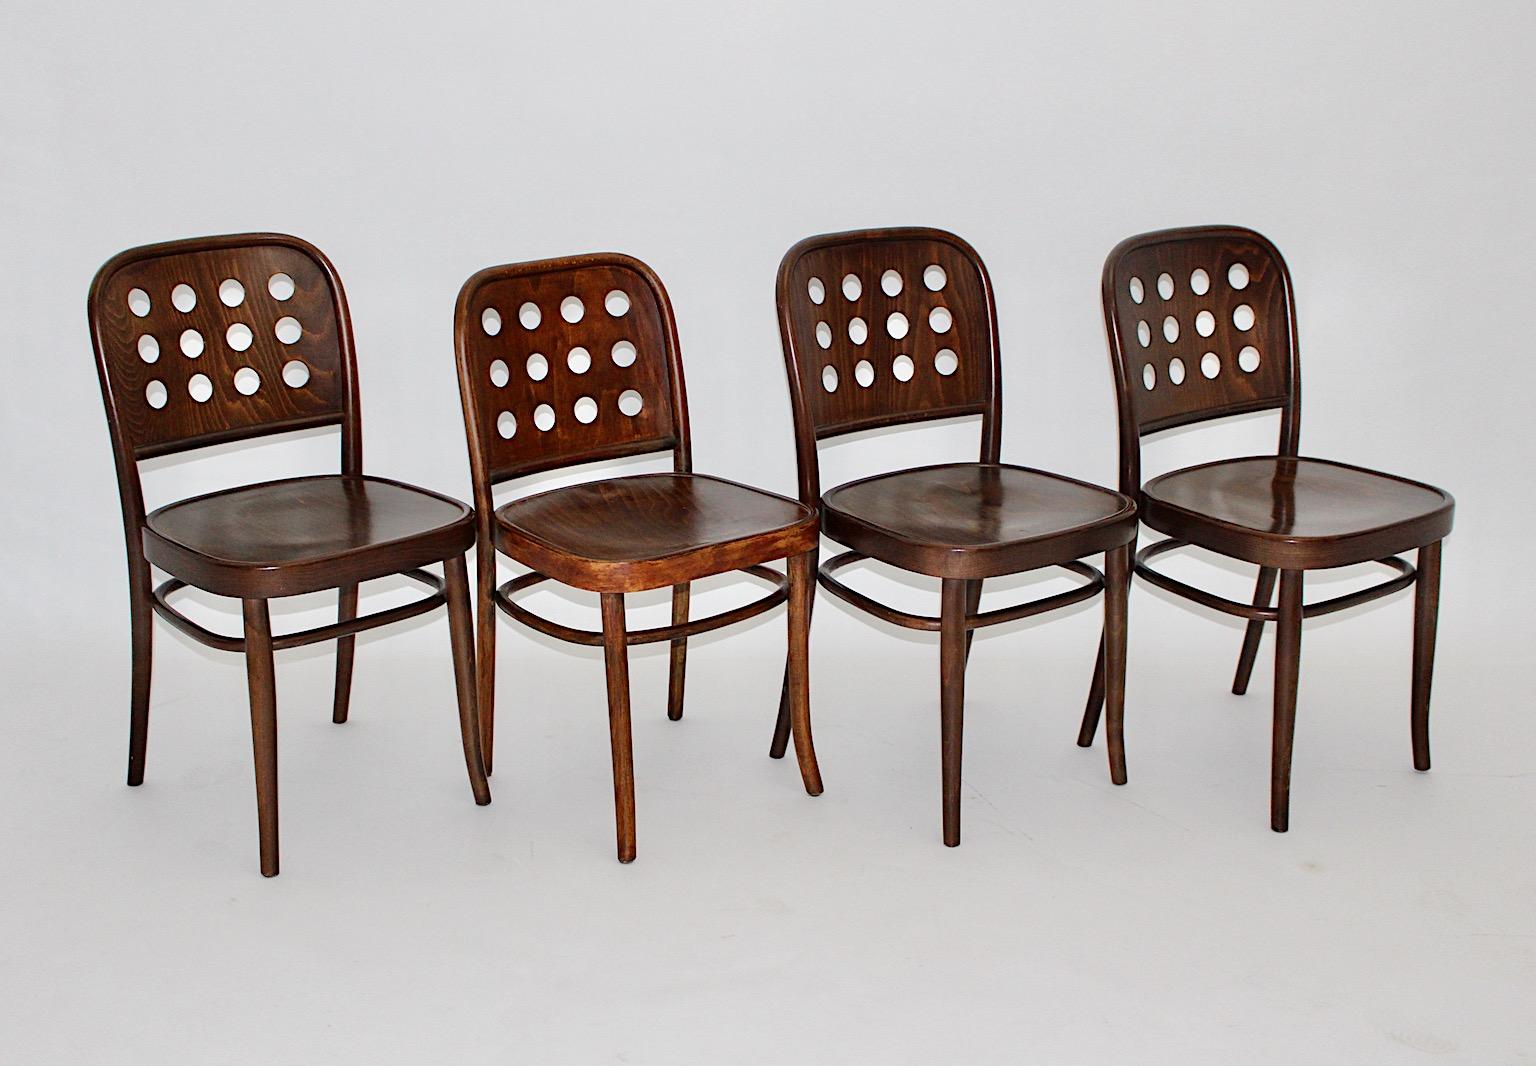 Modernist Josef Hoffmann style 4 vintage dining chairs or easy chairs beech bentwood in chocolate brown color 1990s in an amazing shape.
A beautiful set with four ( 4 ) dining chairs or easy chairs in the style of Josef Hoffmann, 1990s. 
While the